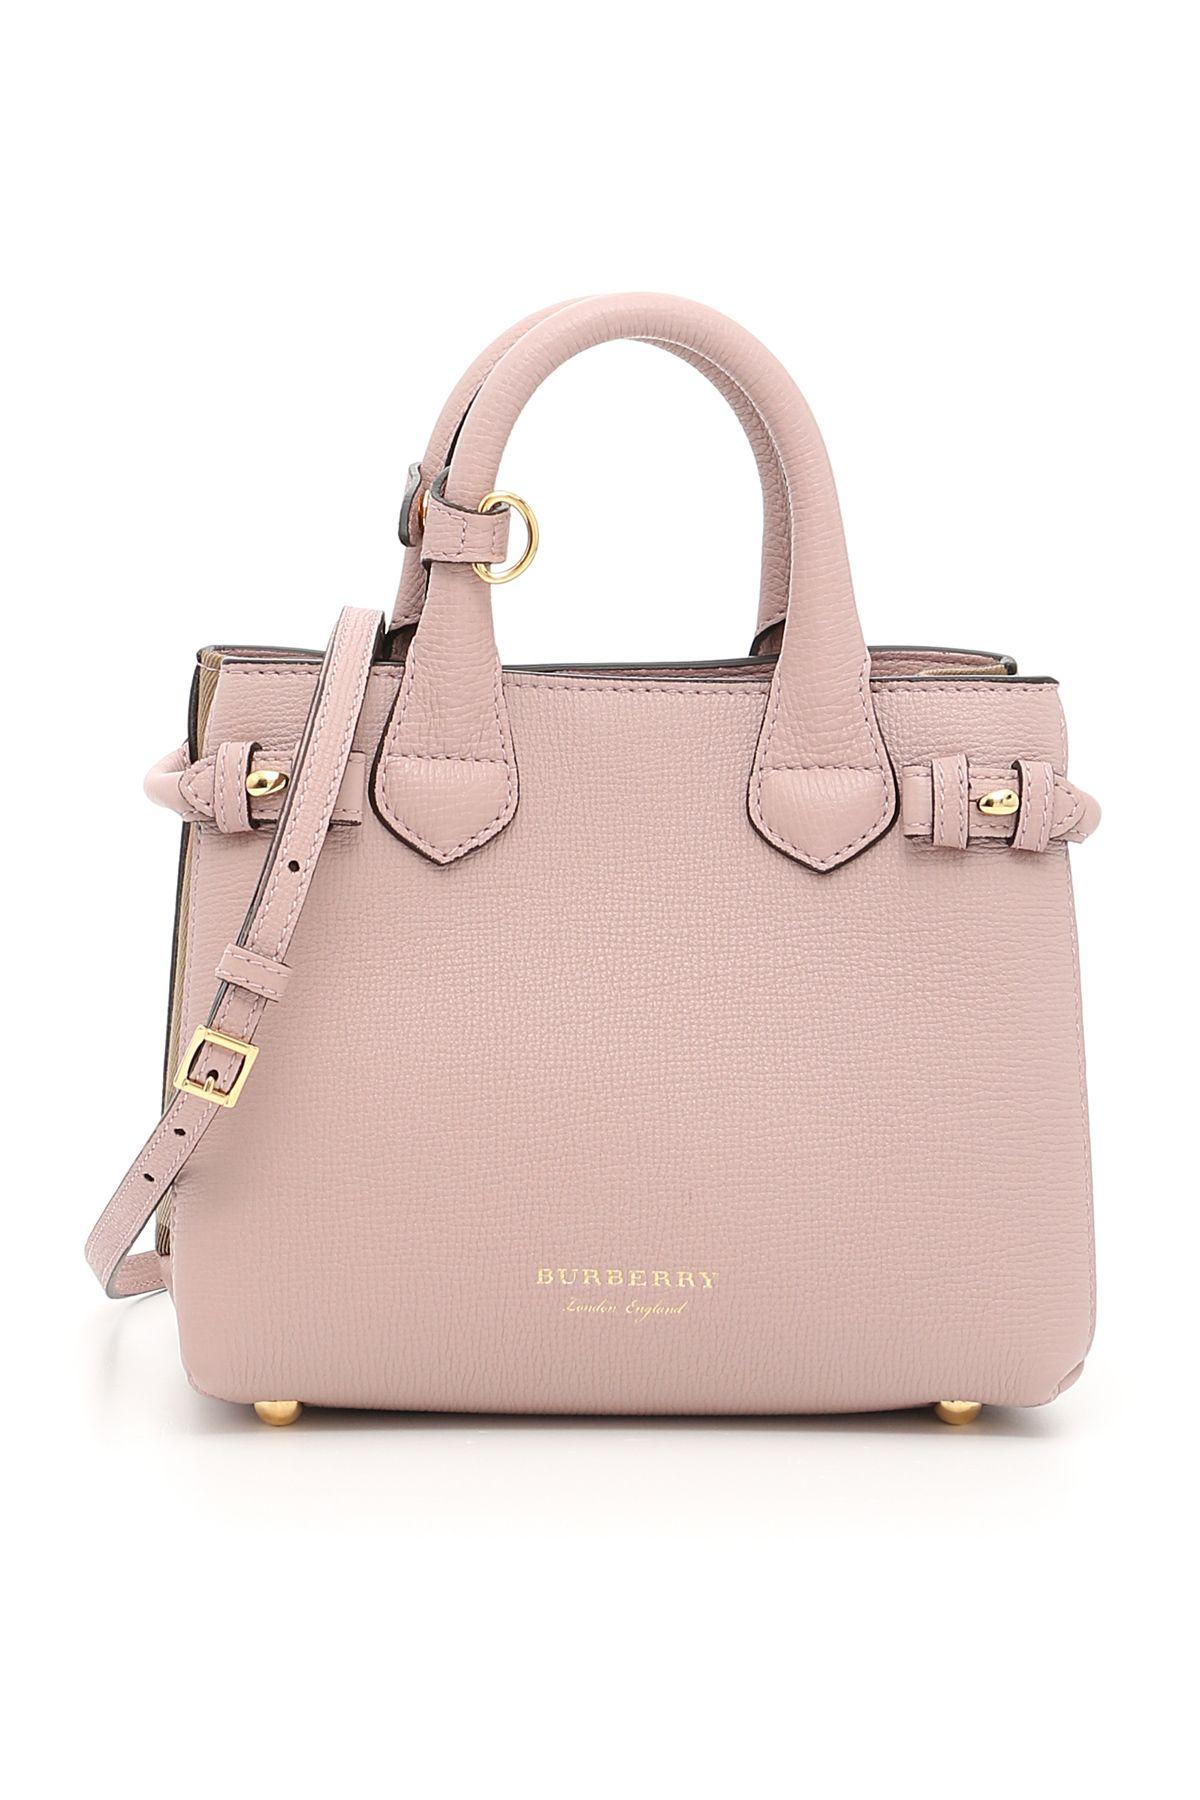 Burberry Baby Banner Bag In Pale Orchidrosa | ModeSens